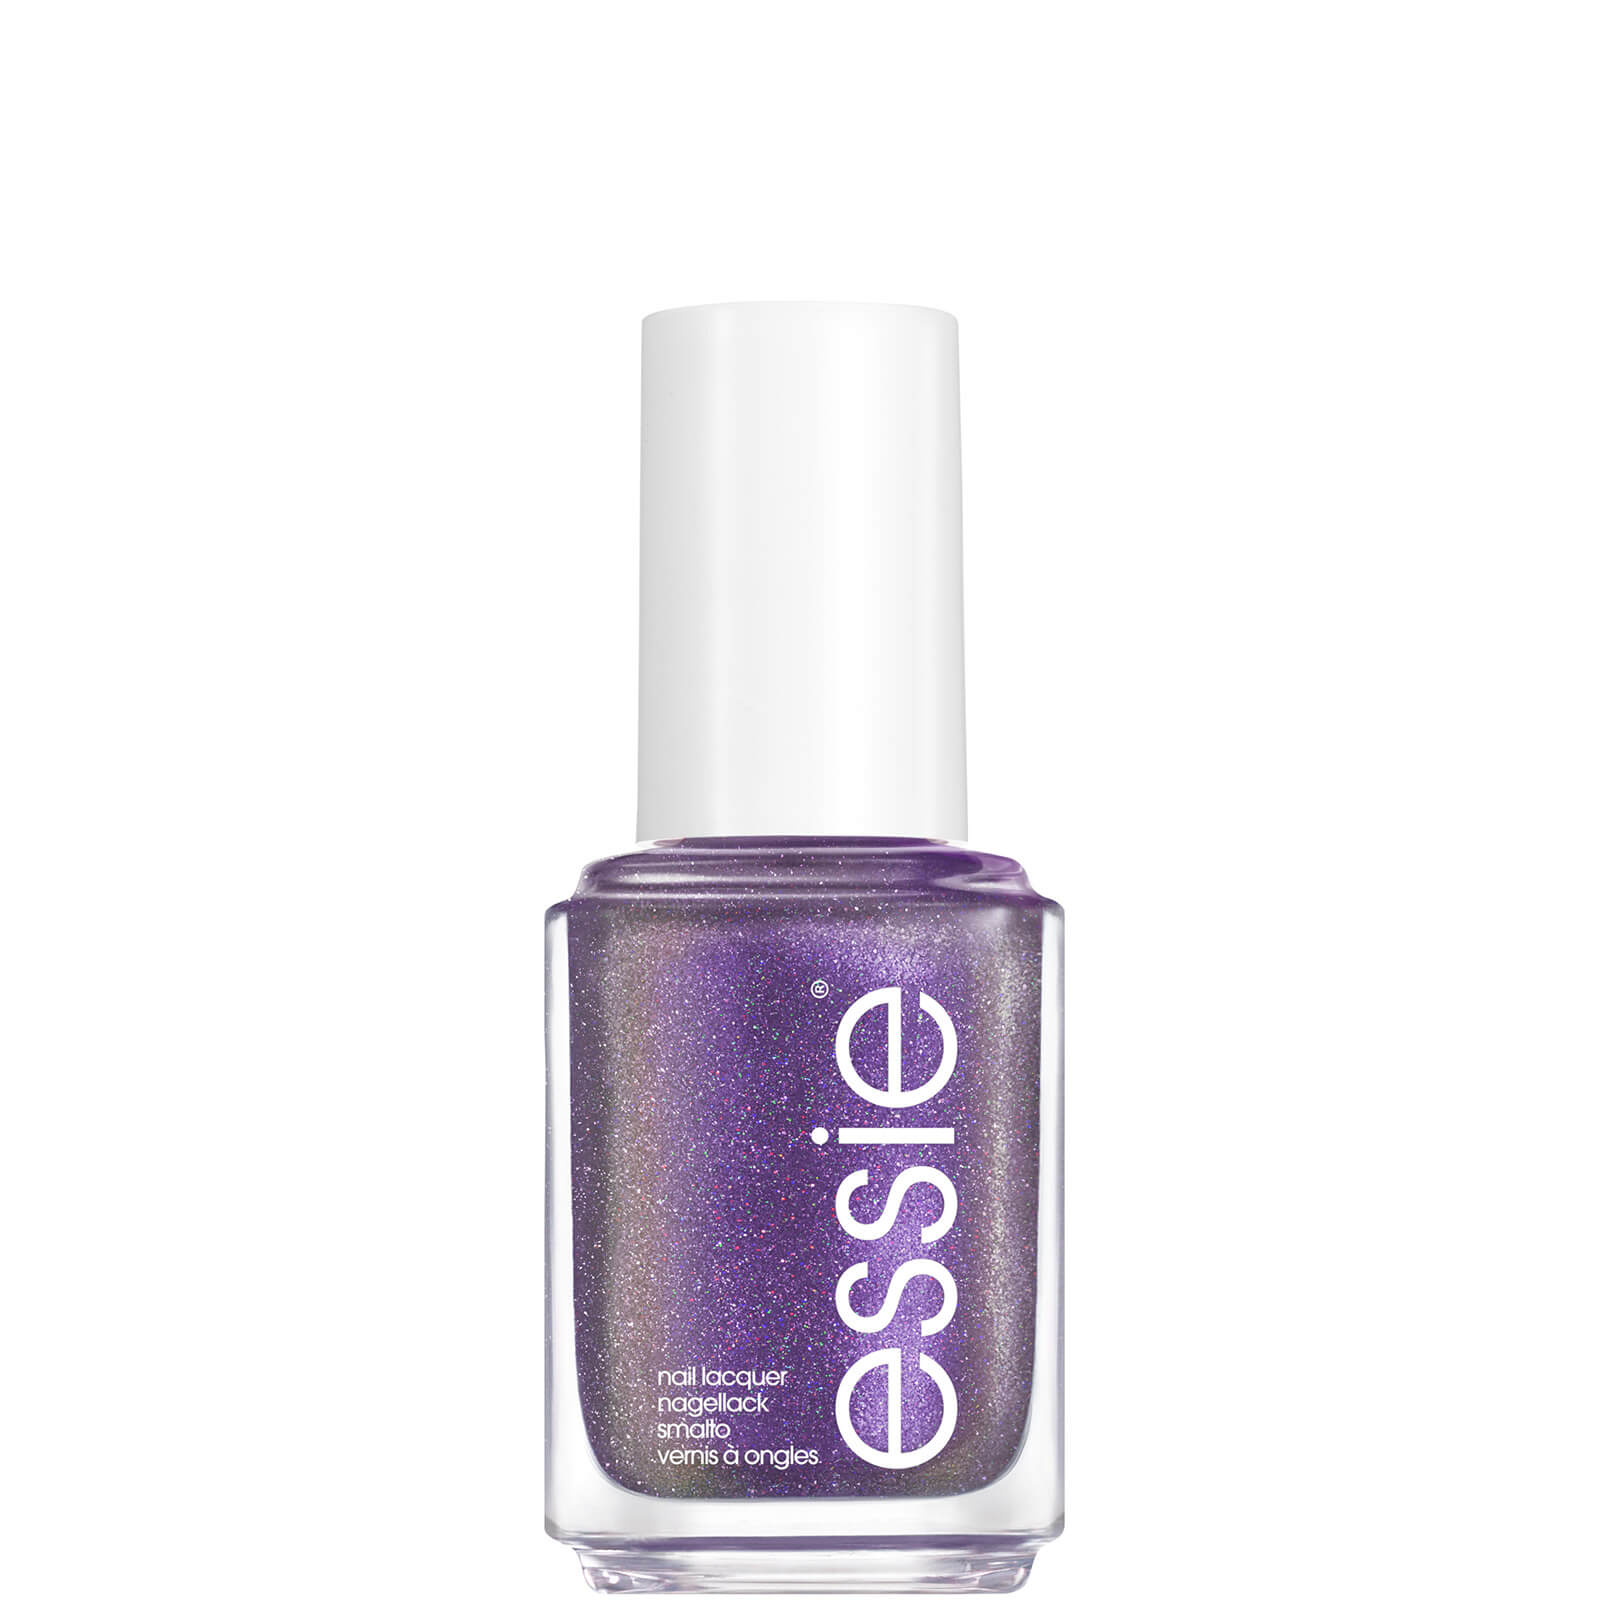 essie Original Nail Polish Roll With It Nail Collection 13.5ml (Various Shades) - 740 Lace Up & Get Down